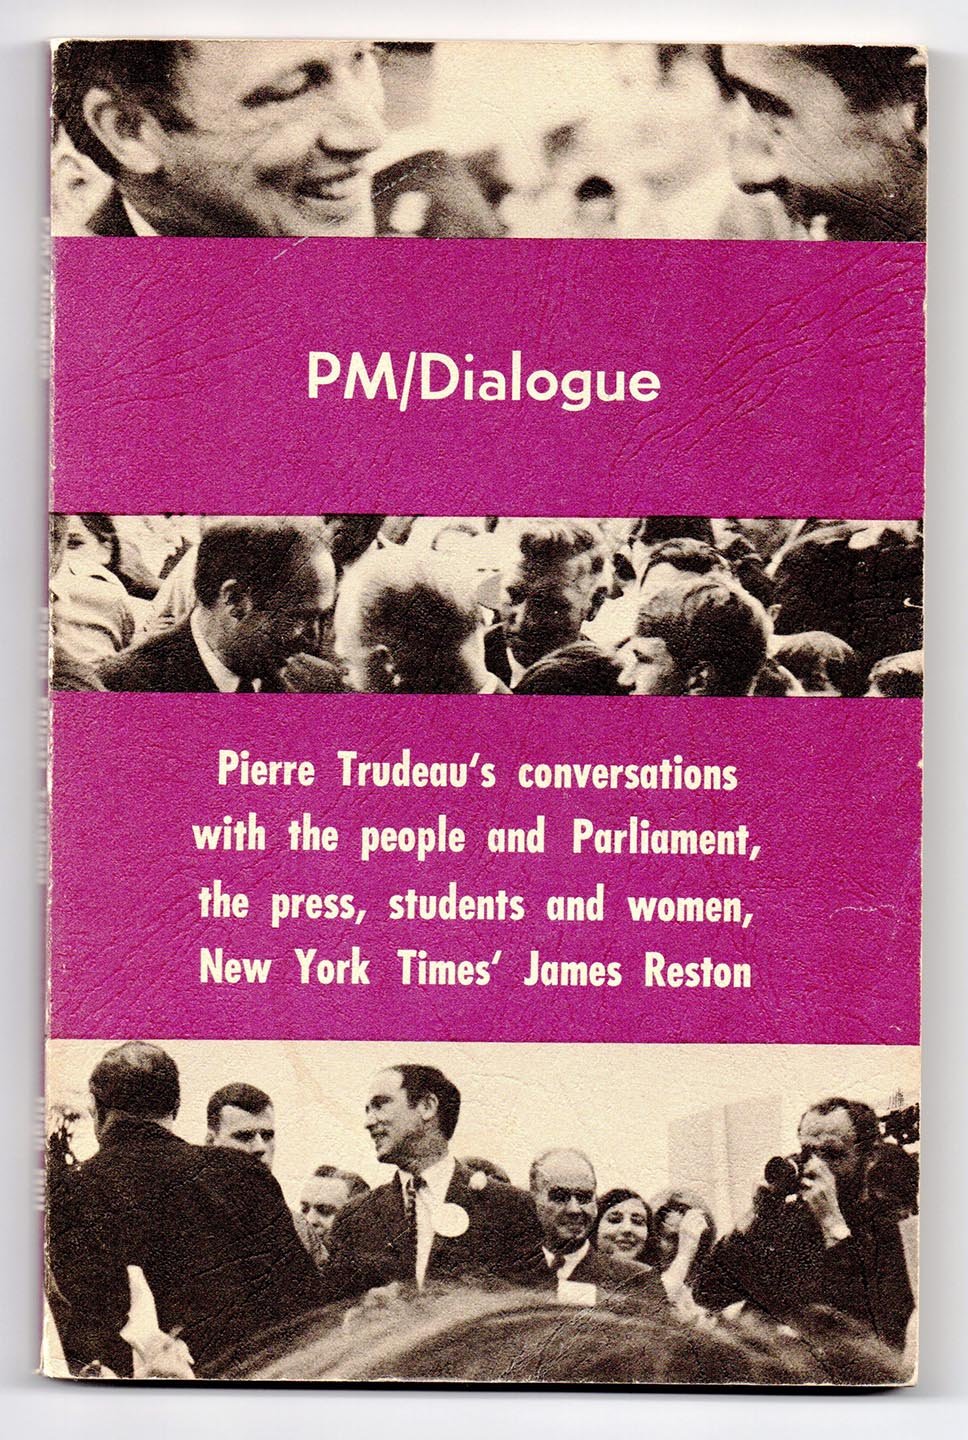 PM/Dialogue: Pierre Trudeau's conversations with the people and Parliament, the press, students and women, New York Times' James Reston